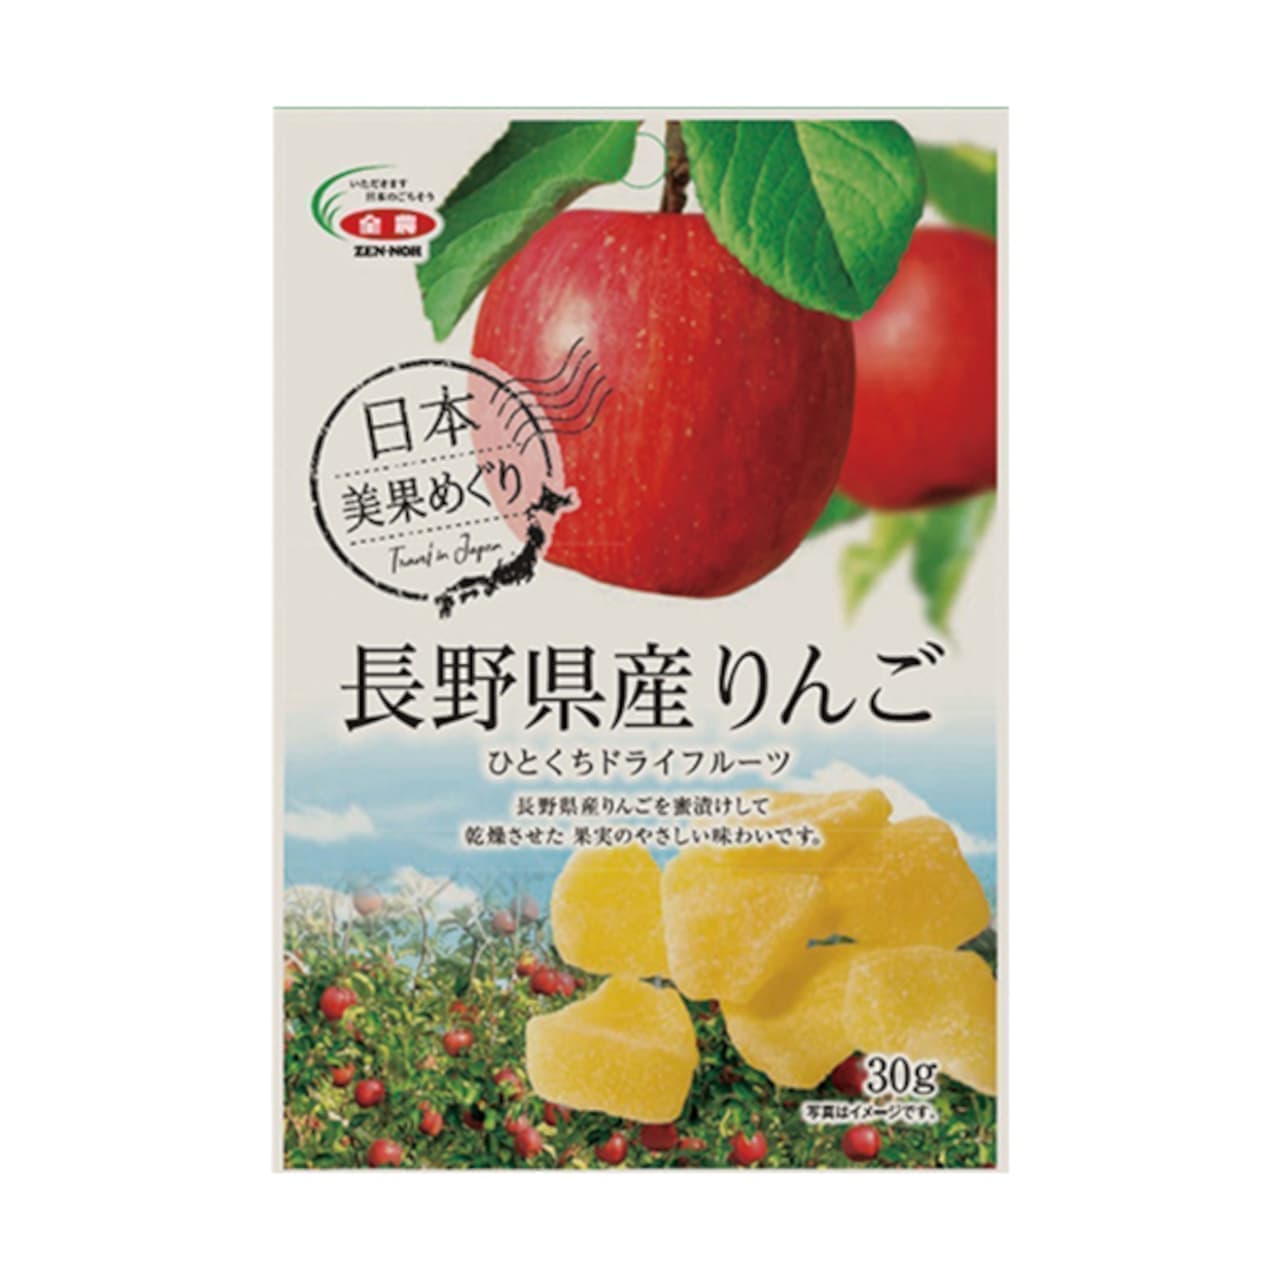 Famima "Zen-Noh Foods: Dried fruit with a bite of Nagano Prefecture apples".